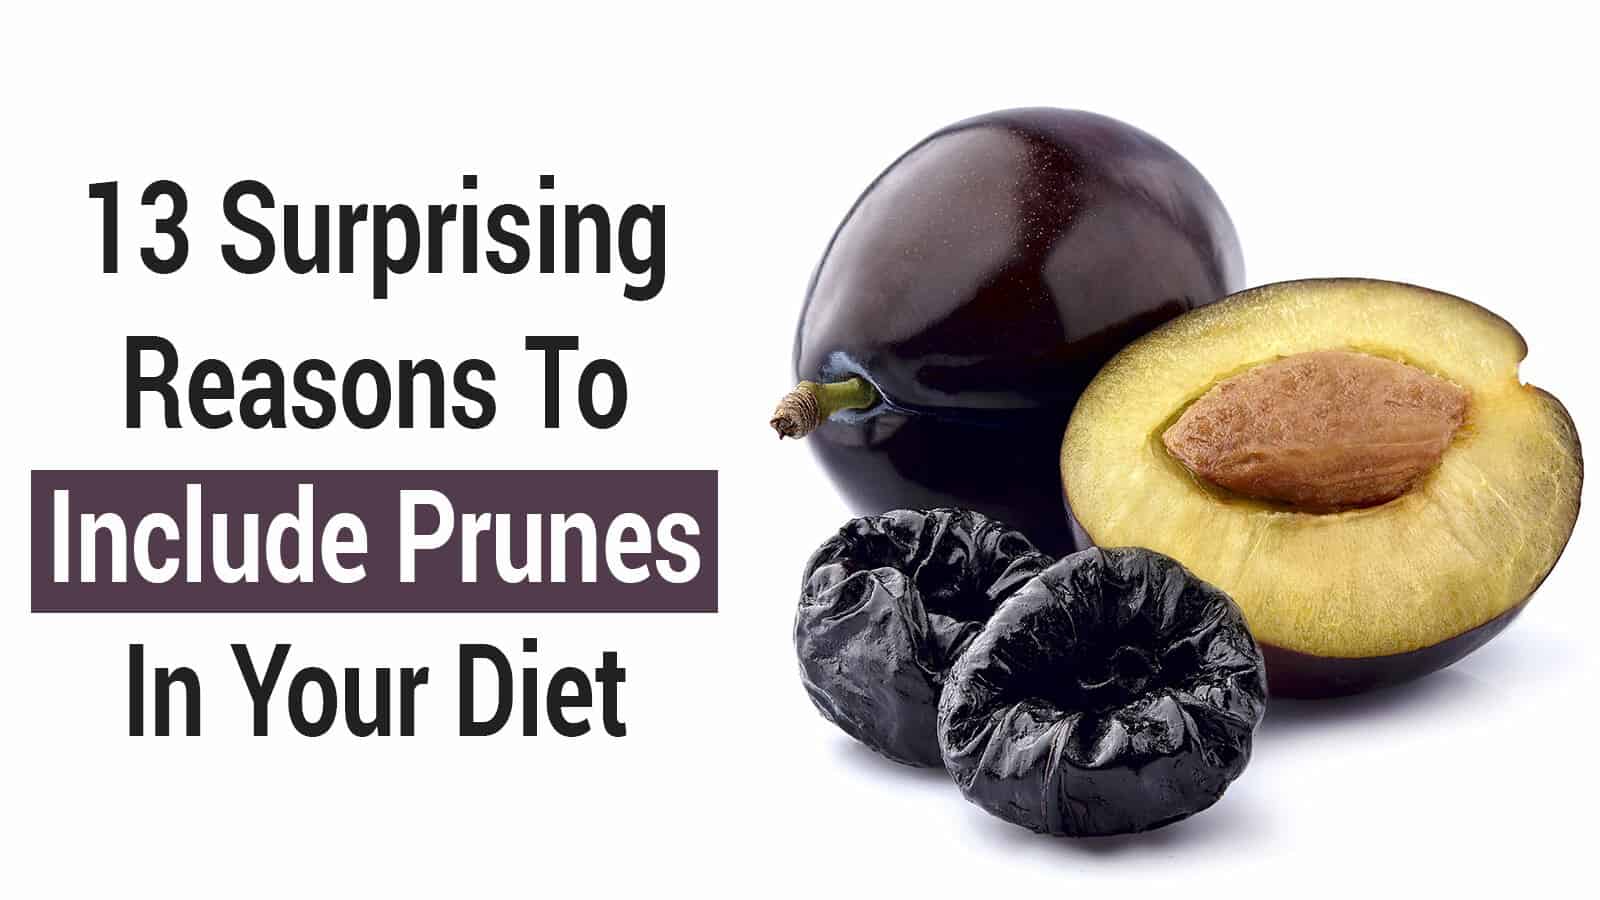 13 Surprising Reasons To Include Prunes In Your Diet | 6 Min. Read